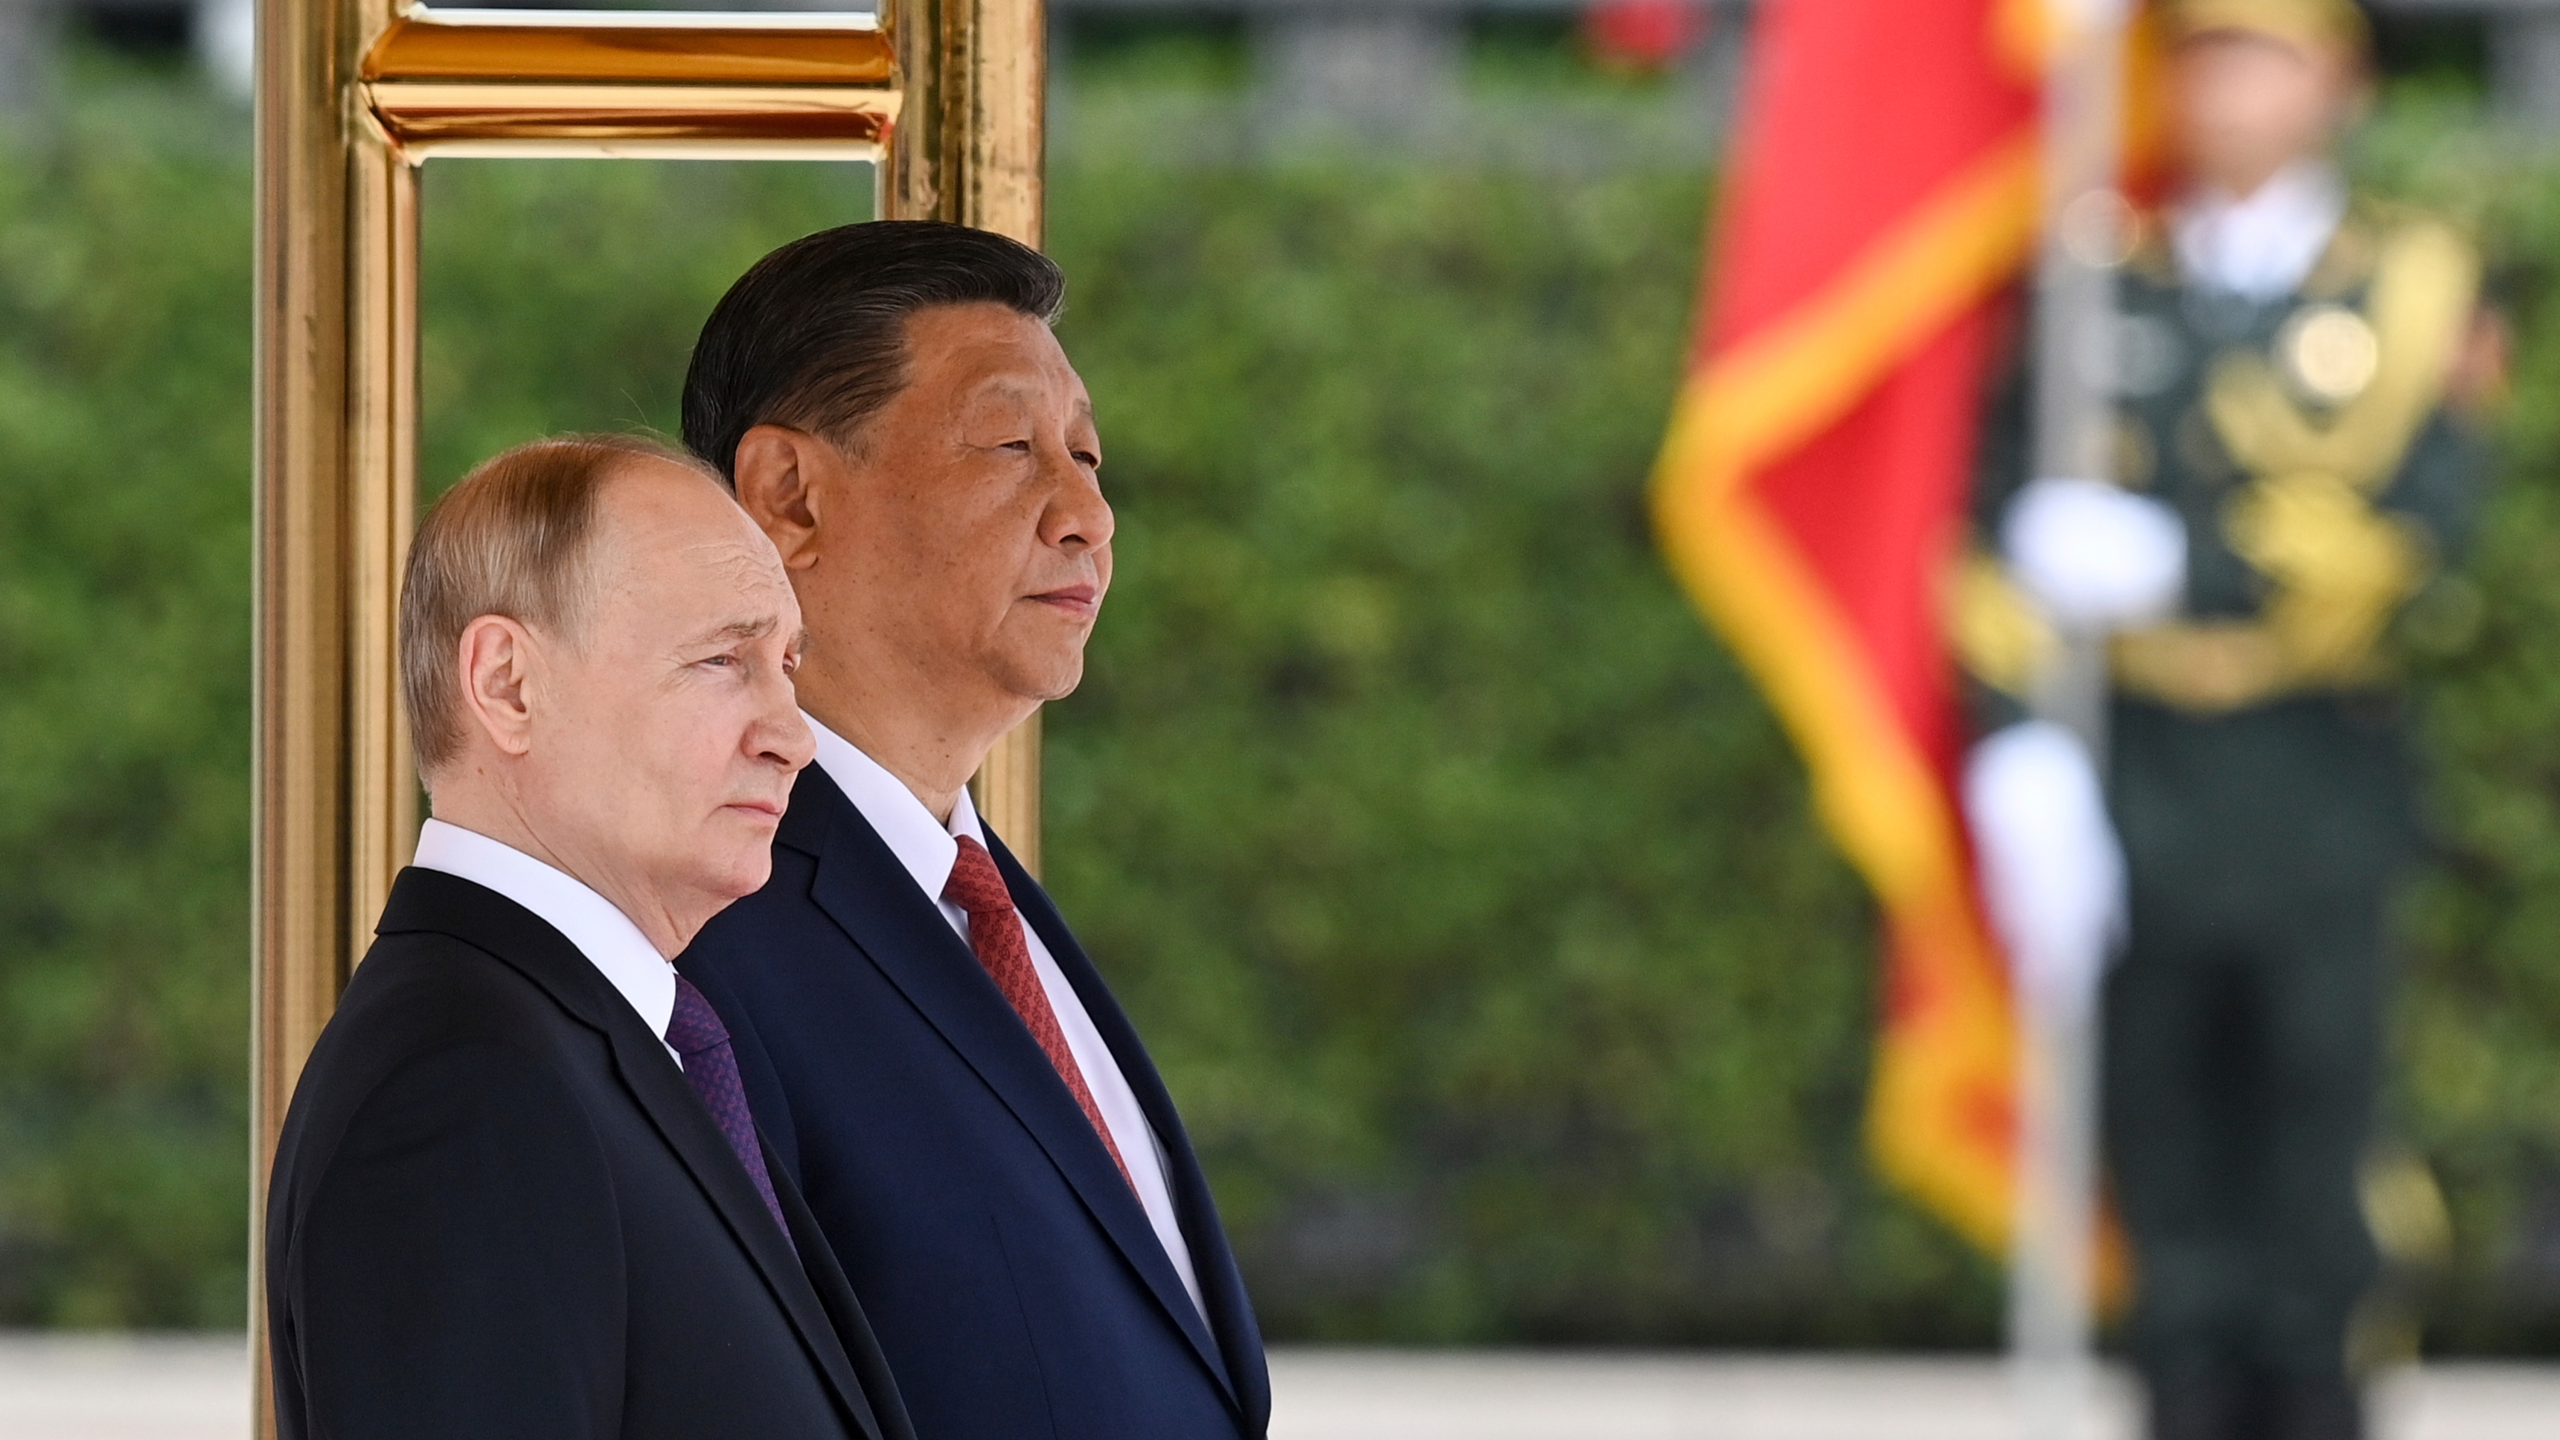 Putin expresses gratitude to Xi for China’s initiatives to resolve the Ukraine conflict